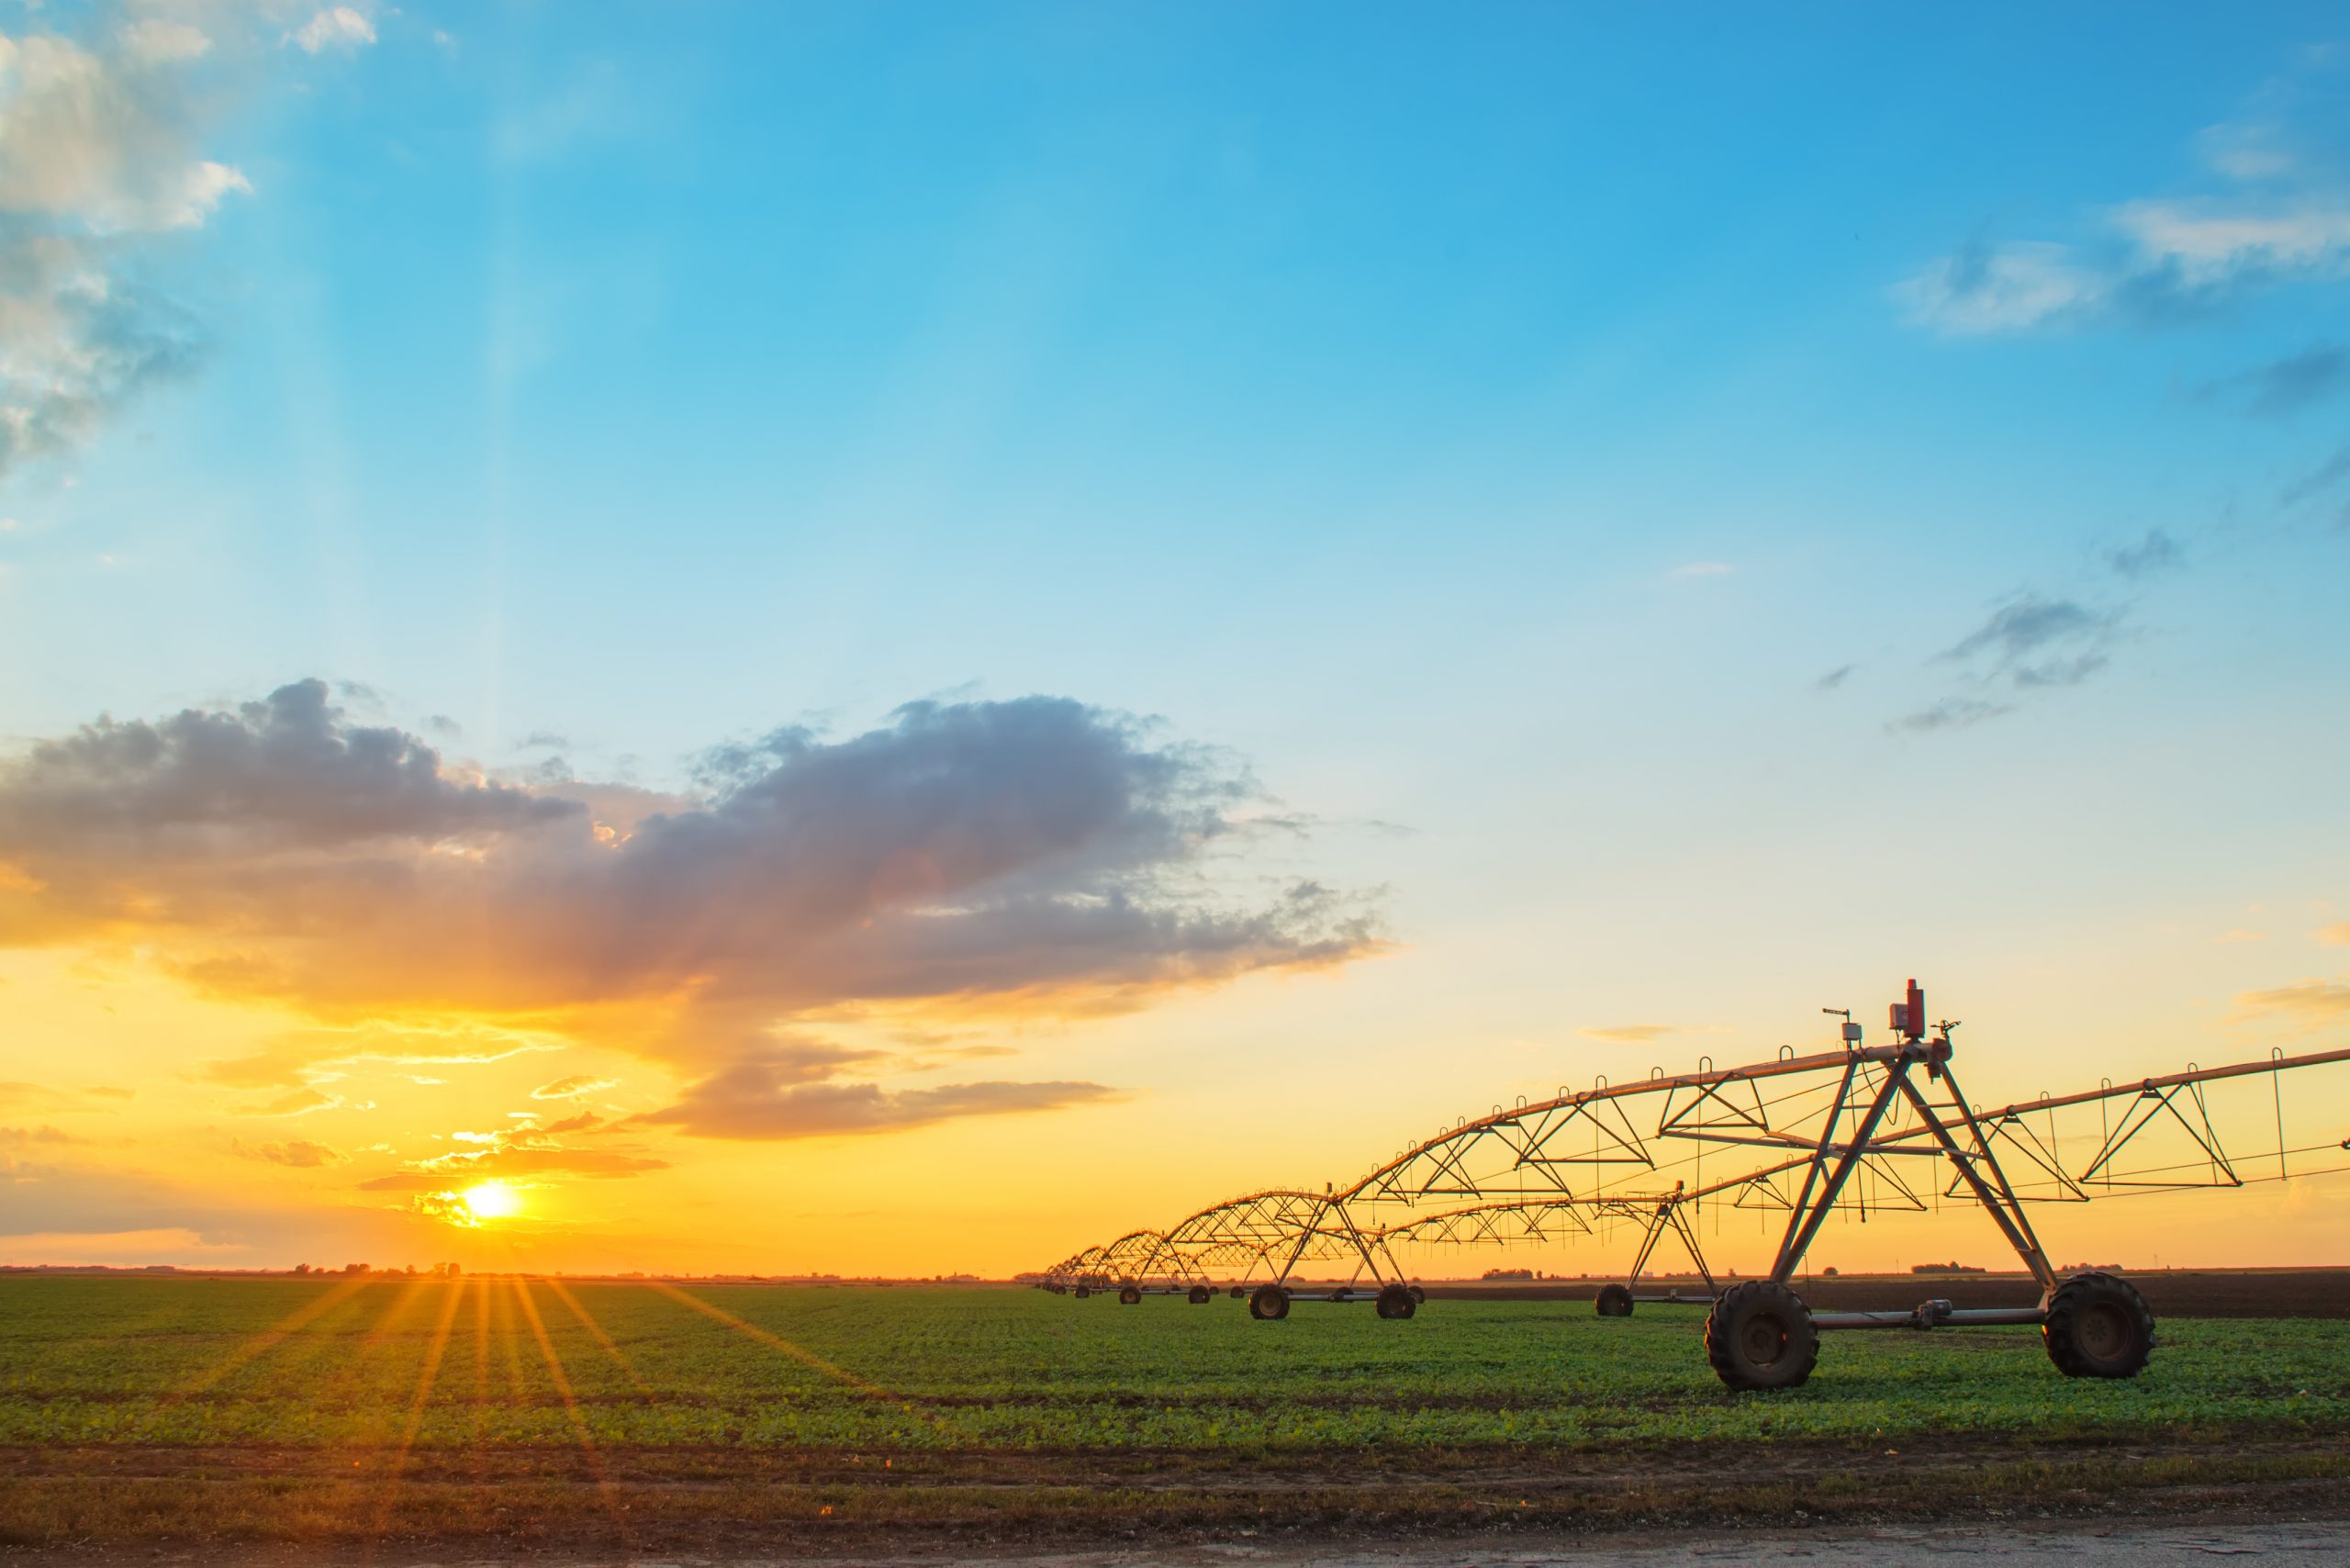 Automated farming irrigation sprinklers system on cultivated agricultural landscape field in sunset